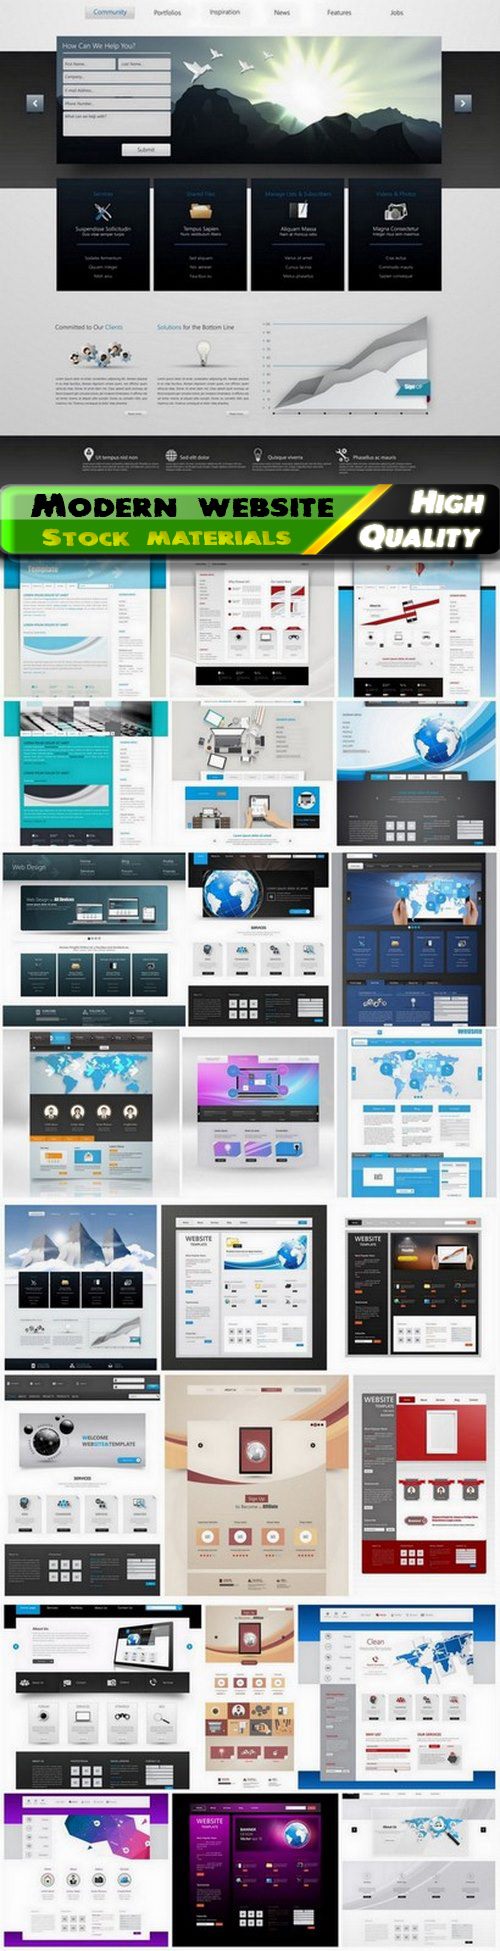 One page of modern website template design - 25 Eps